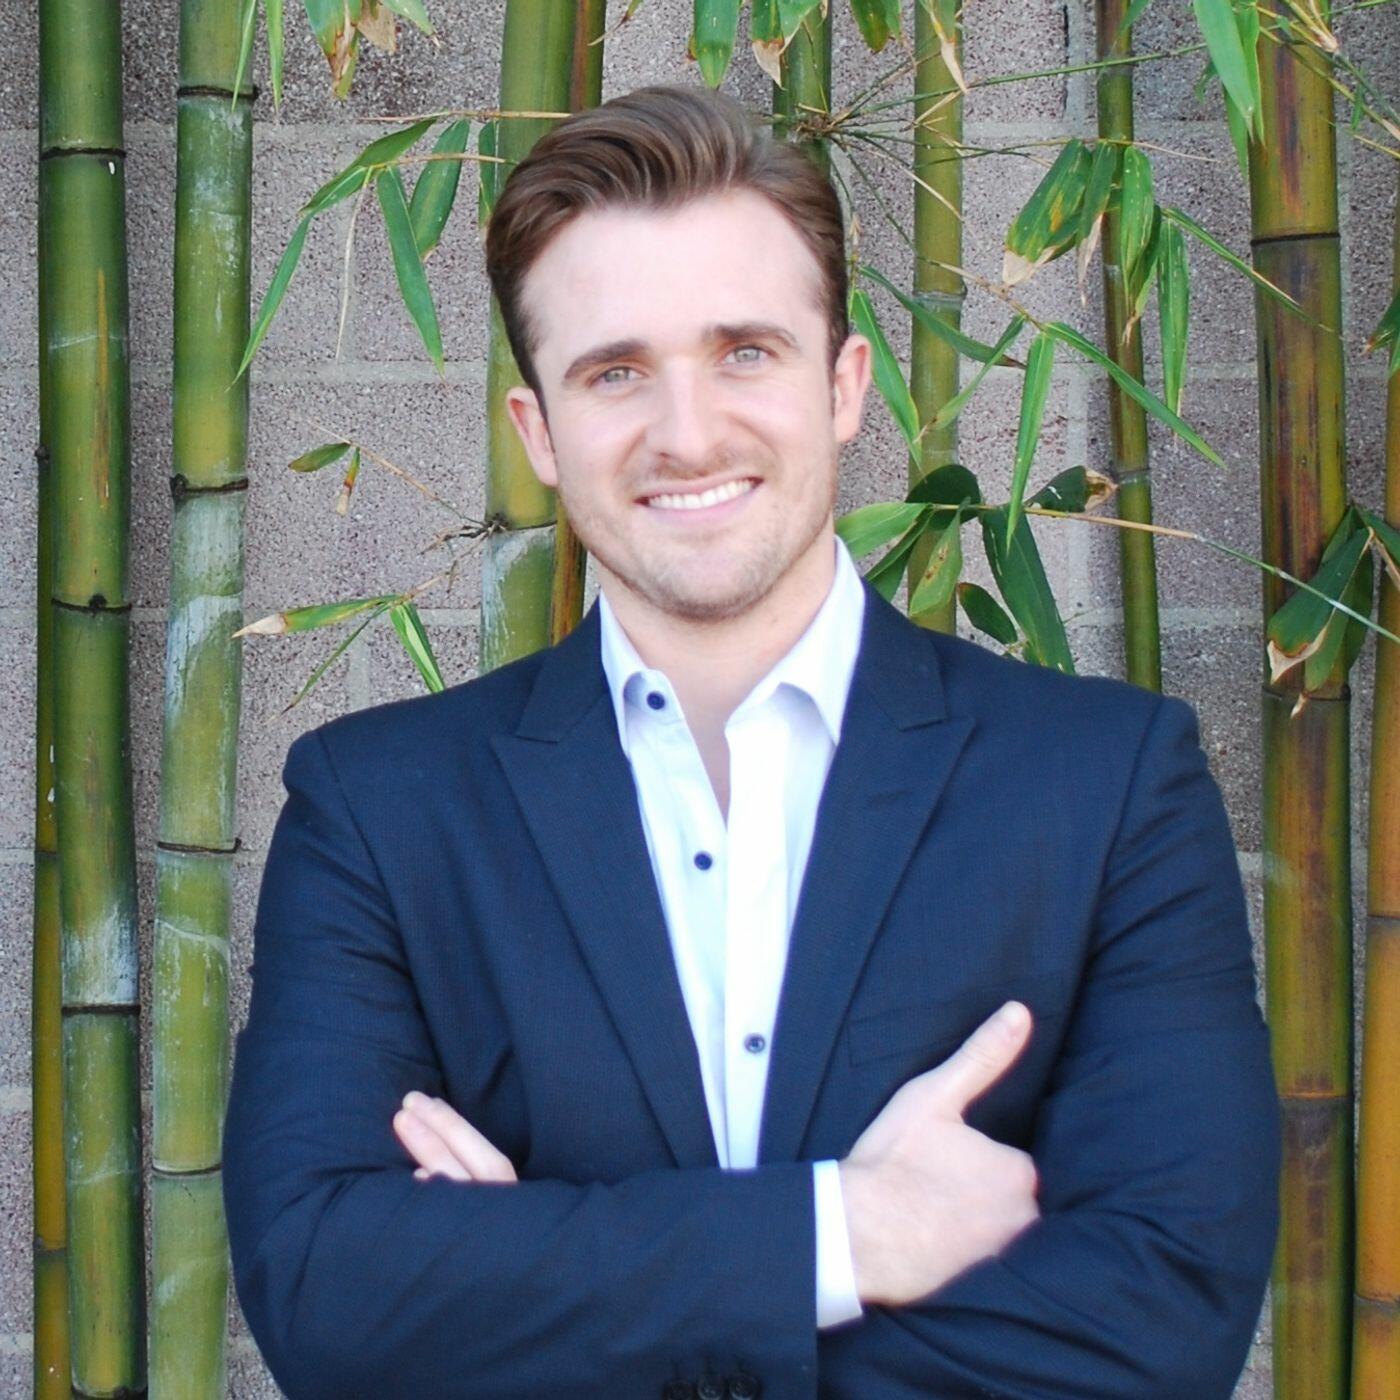 Listen Free to LOVE Life with Matthew Hussey on iHeartRadio Podcasts